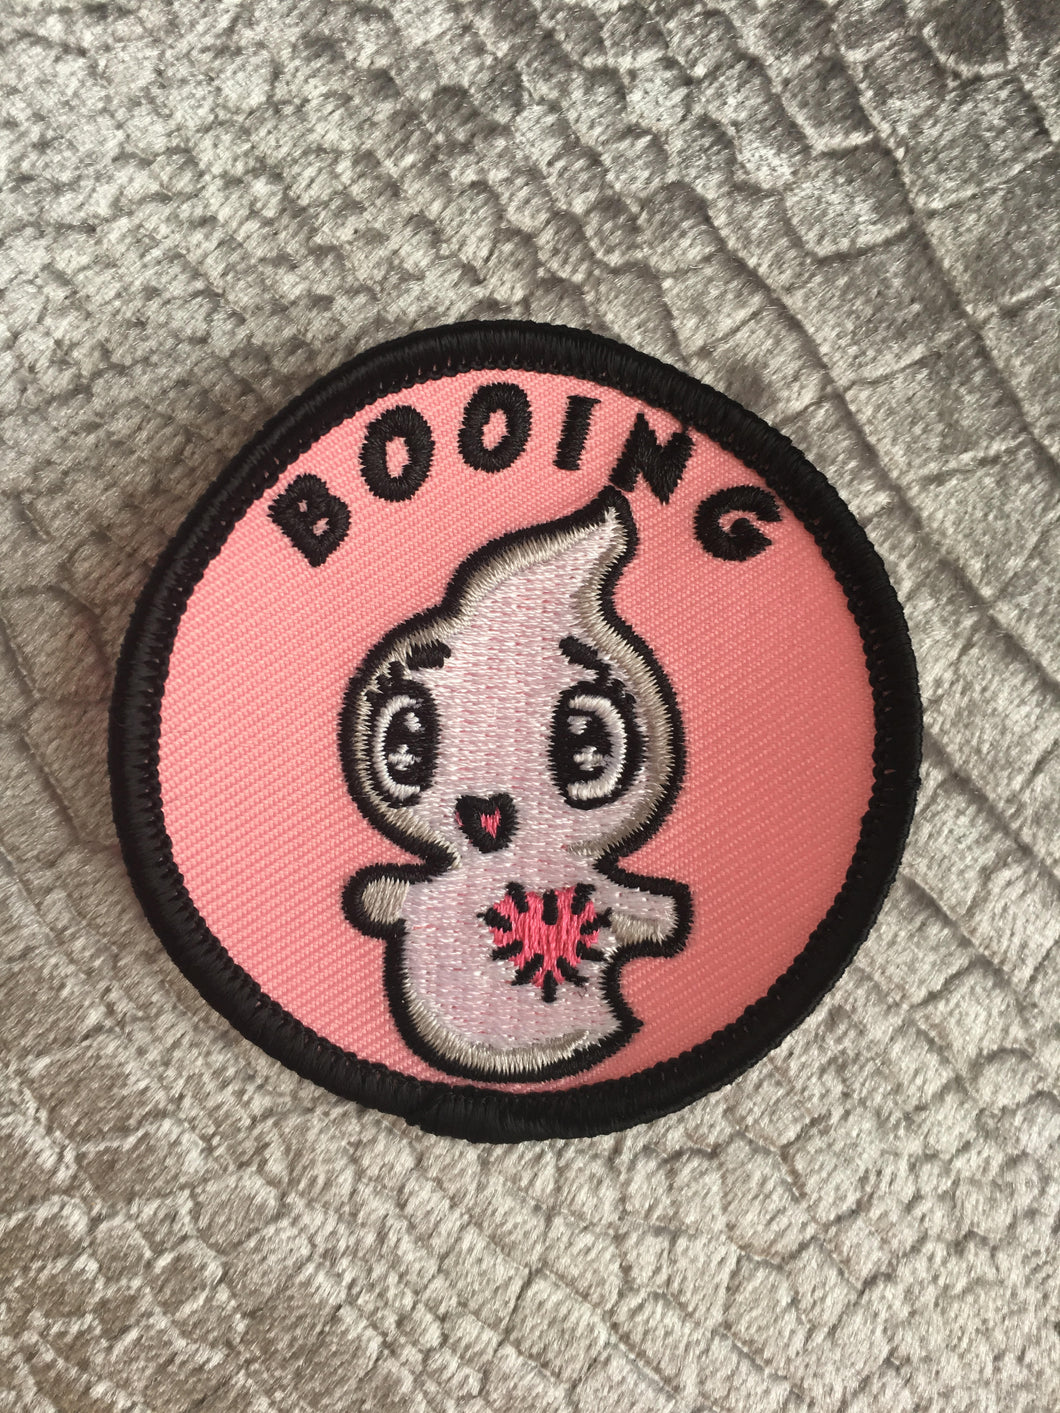 Boo Patch - Year 1